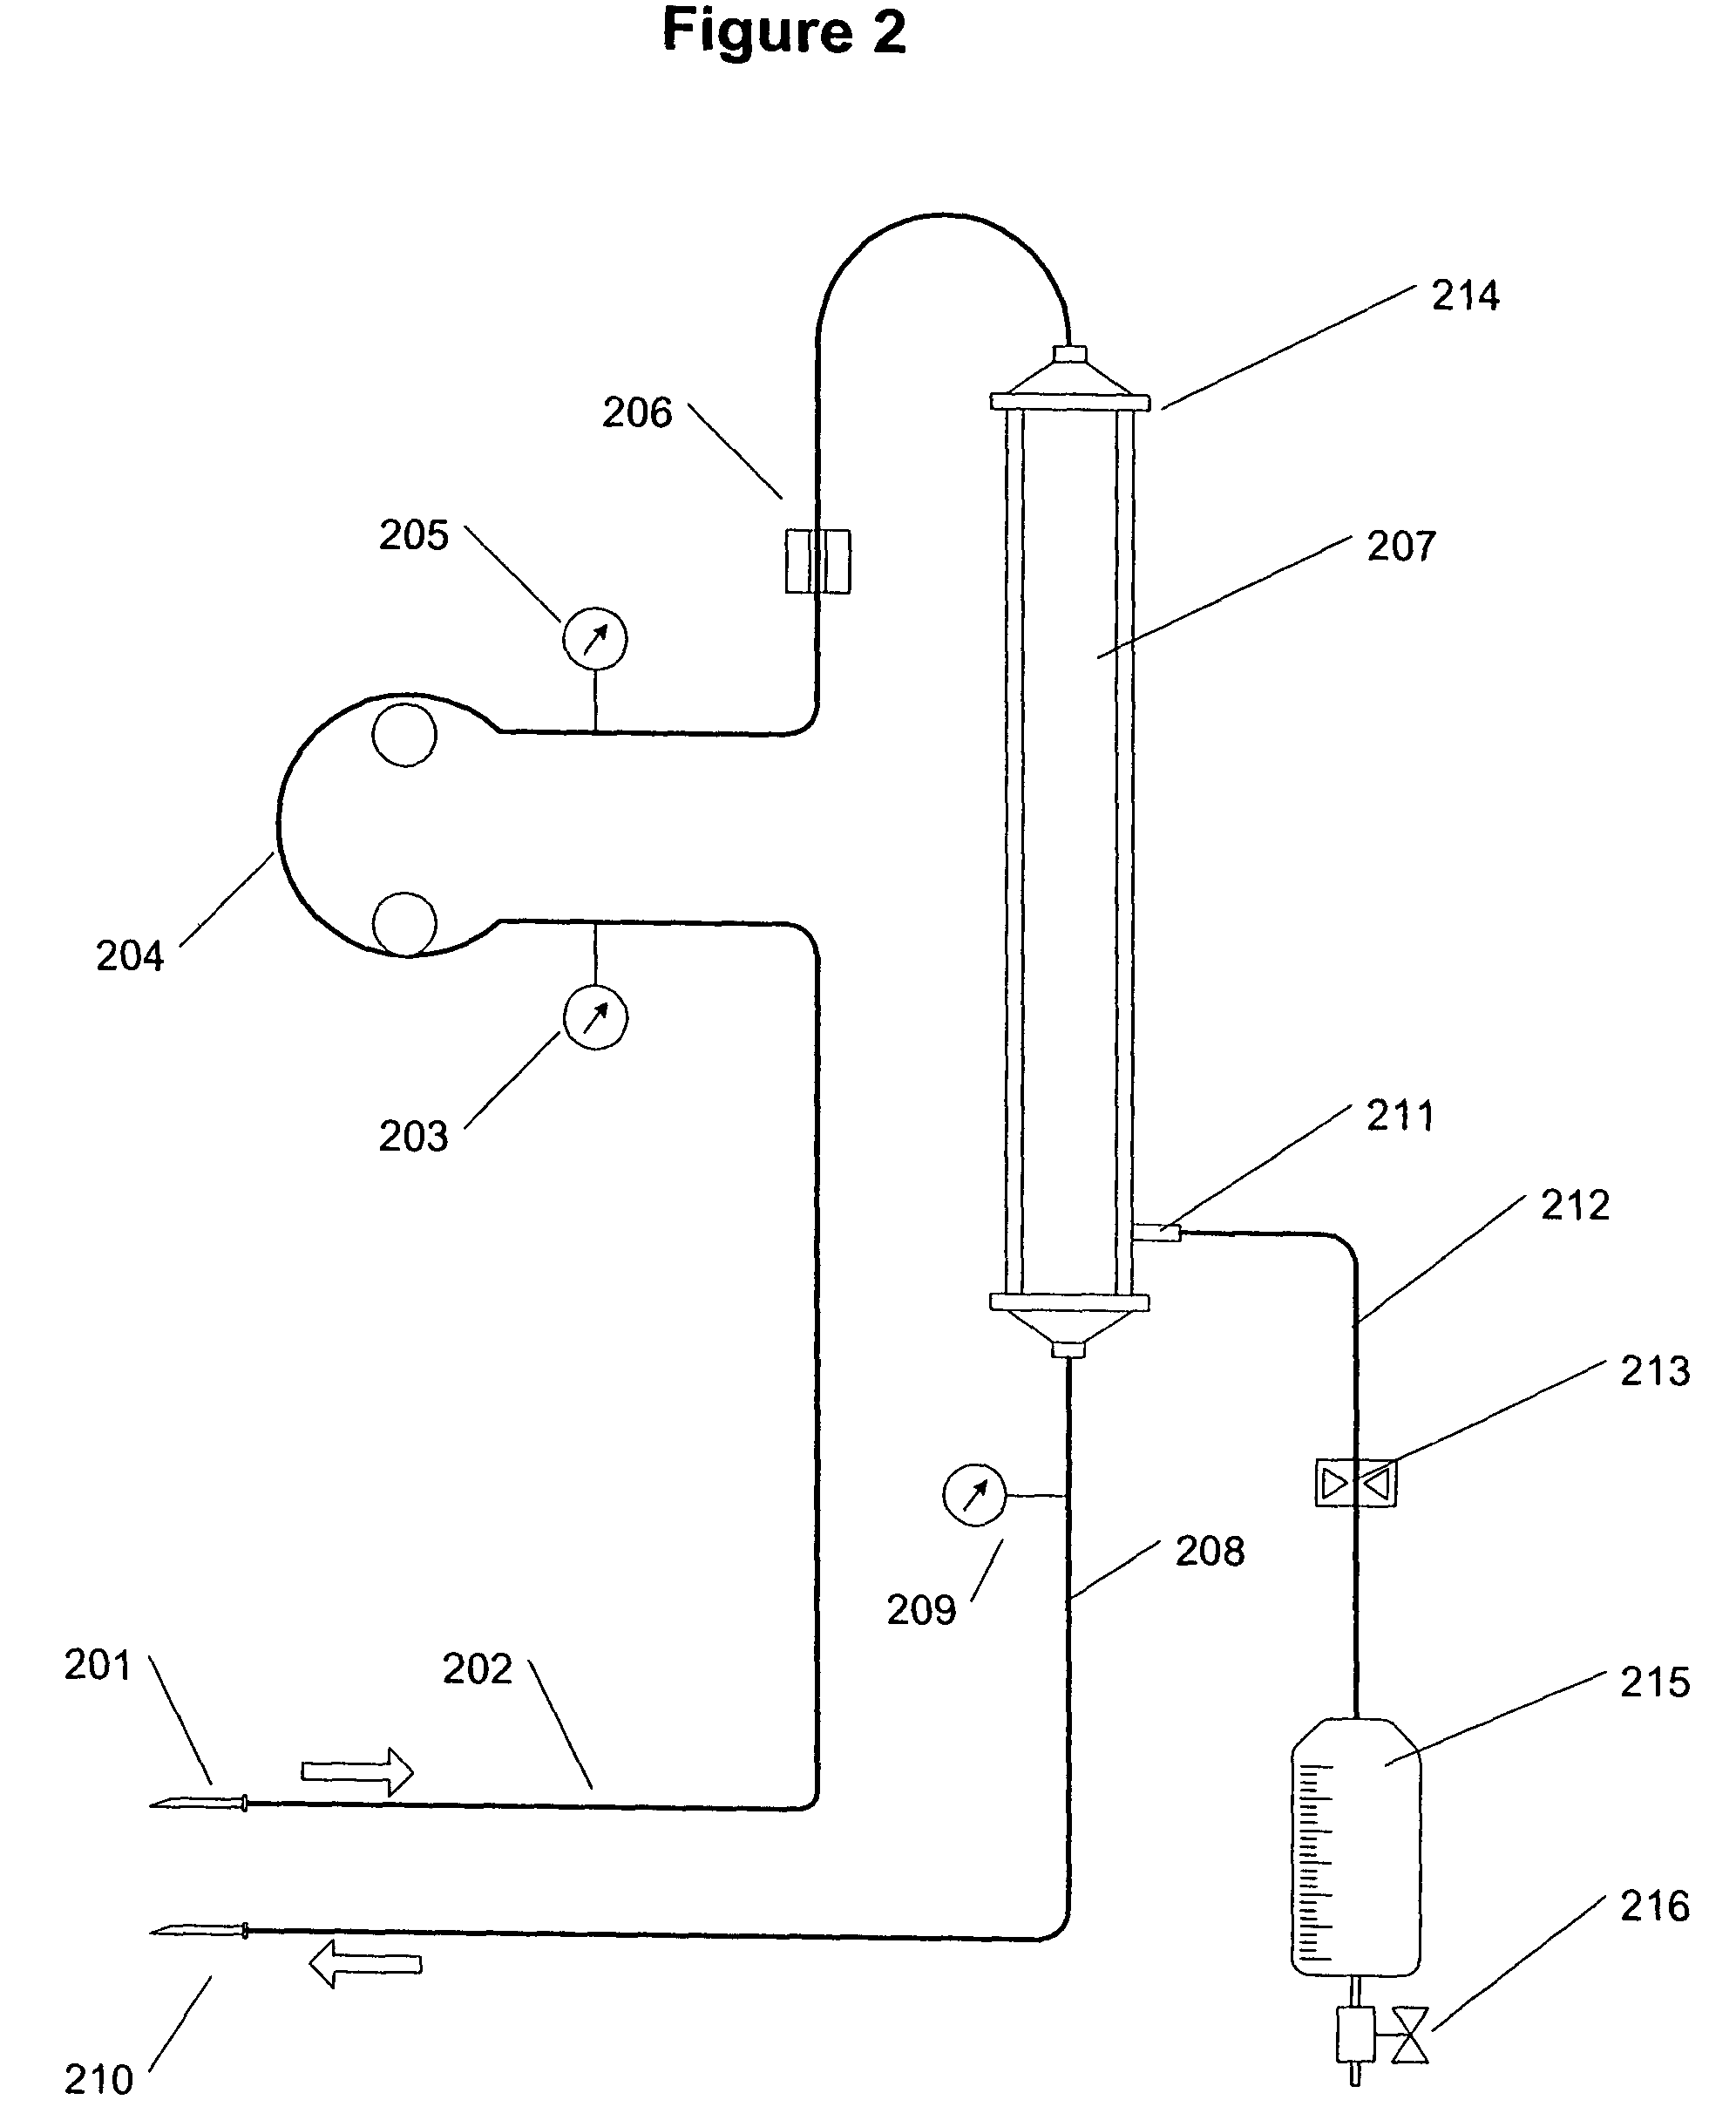 Method and apparatus for peripheral vein fluid removal in heart failure